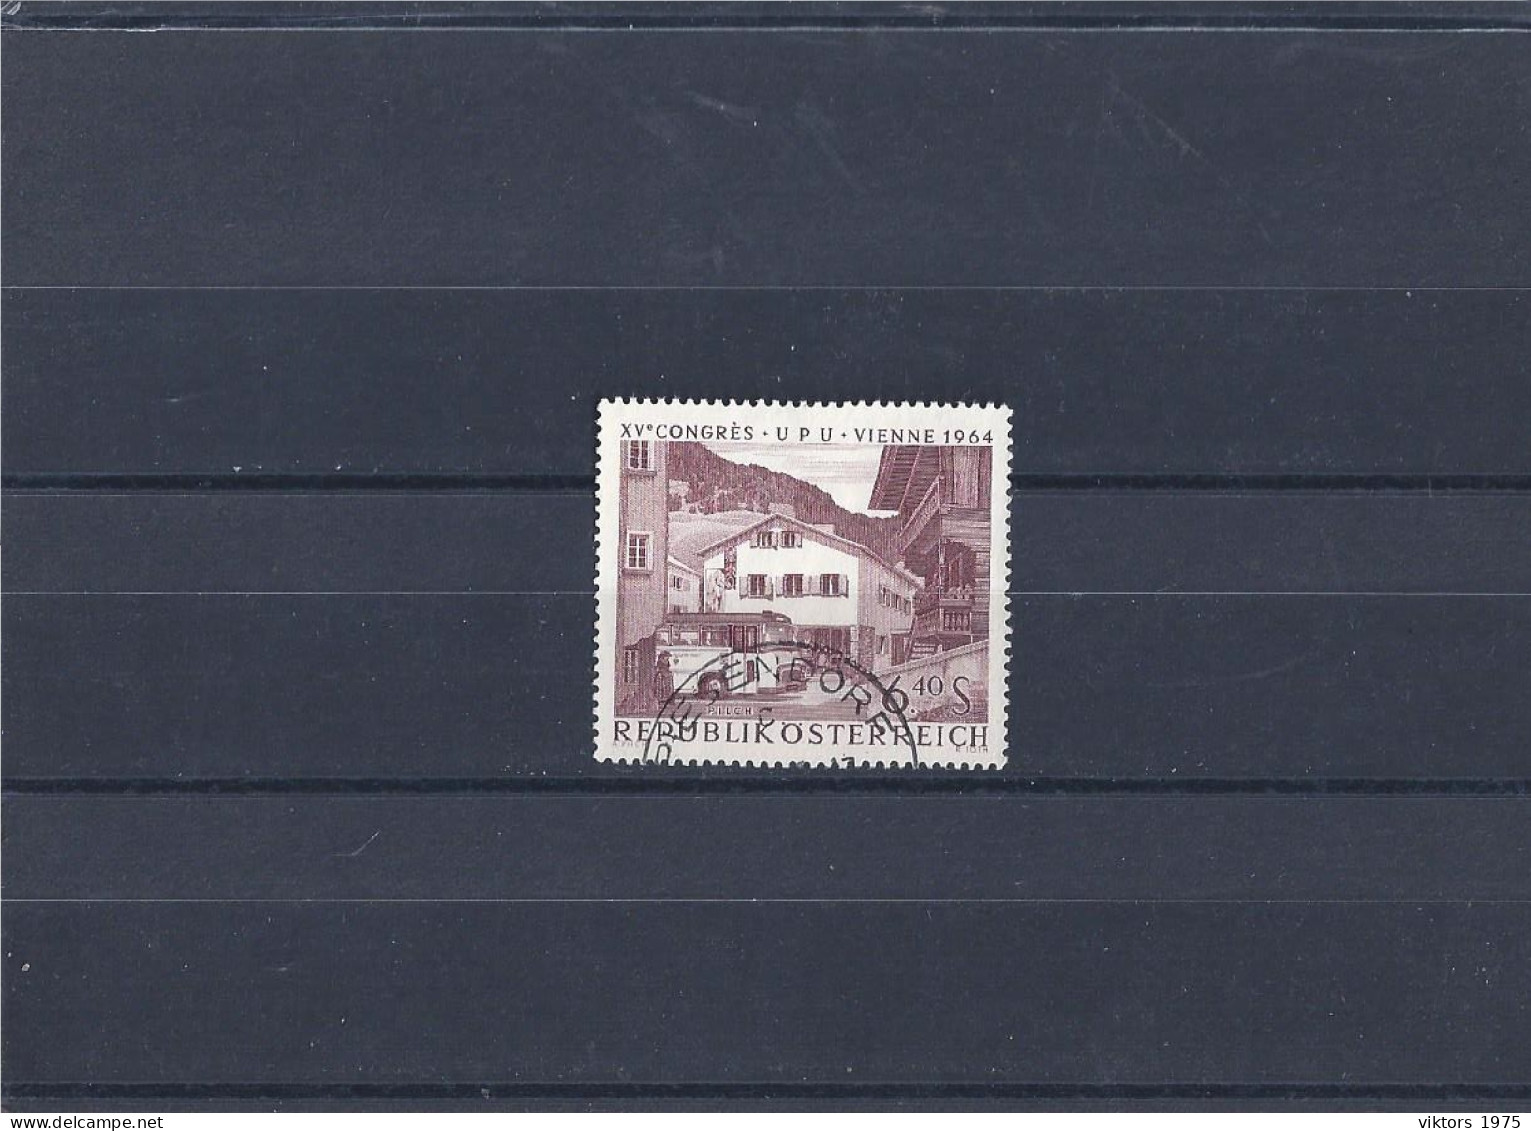 Used Stamp Nr.1163 In MICHEL Catalog - Used Stamps